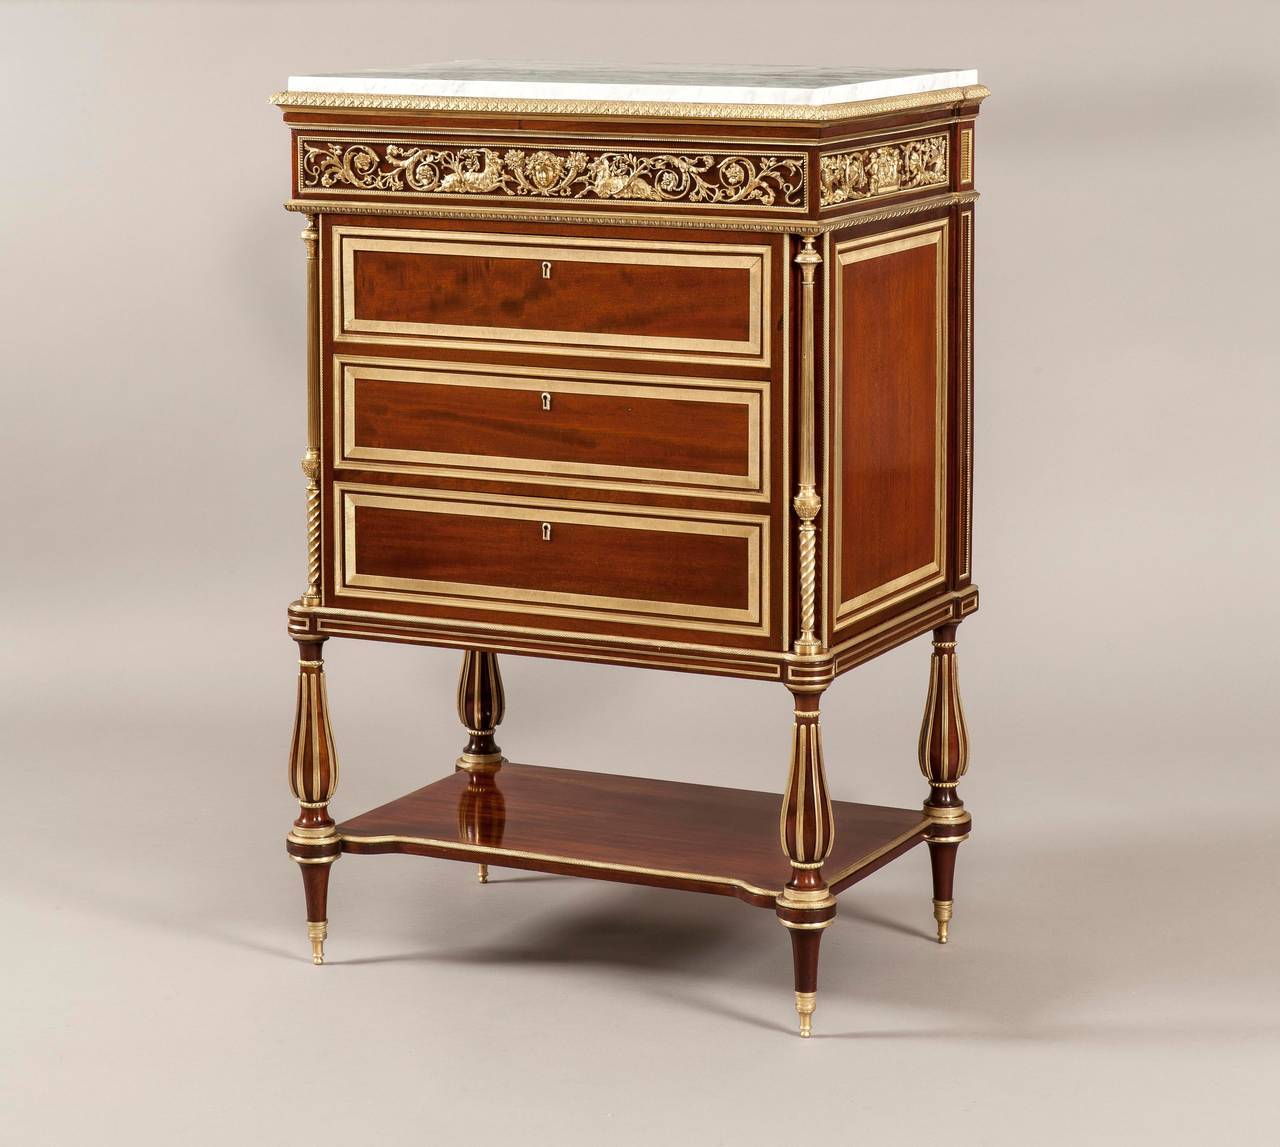 Pair of Commodes In the Manner of Adam Weisweiler

of rectangular form, constructed in mahogany, dressed with Fine bronze mounts and brass inlays; rising from tapering and turned toupie feet, the baluster form legs are brass inlaid, having ormolu